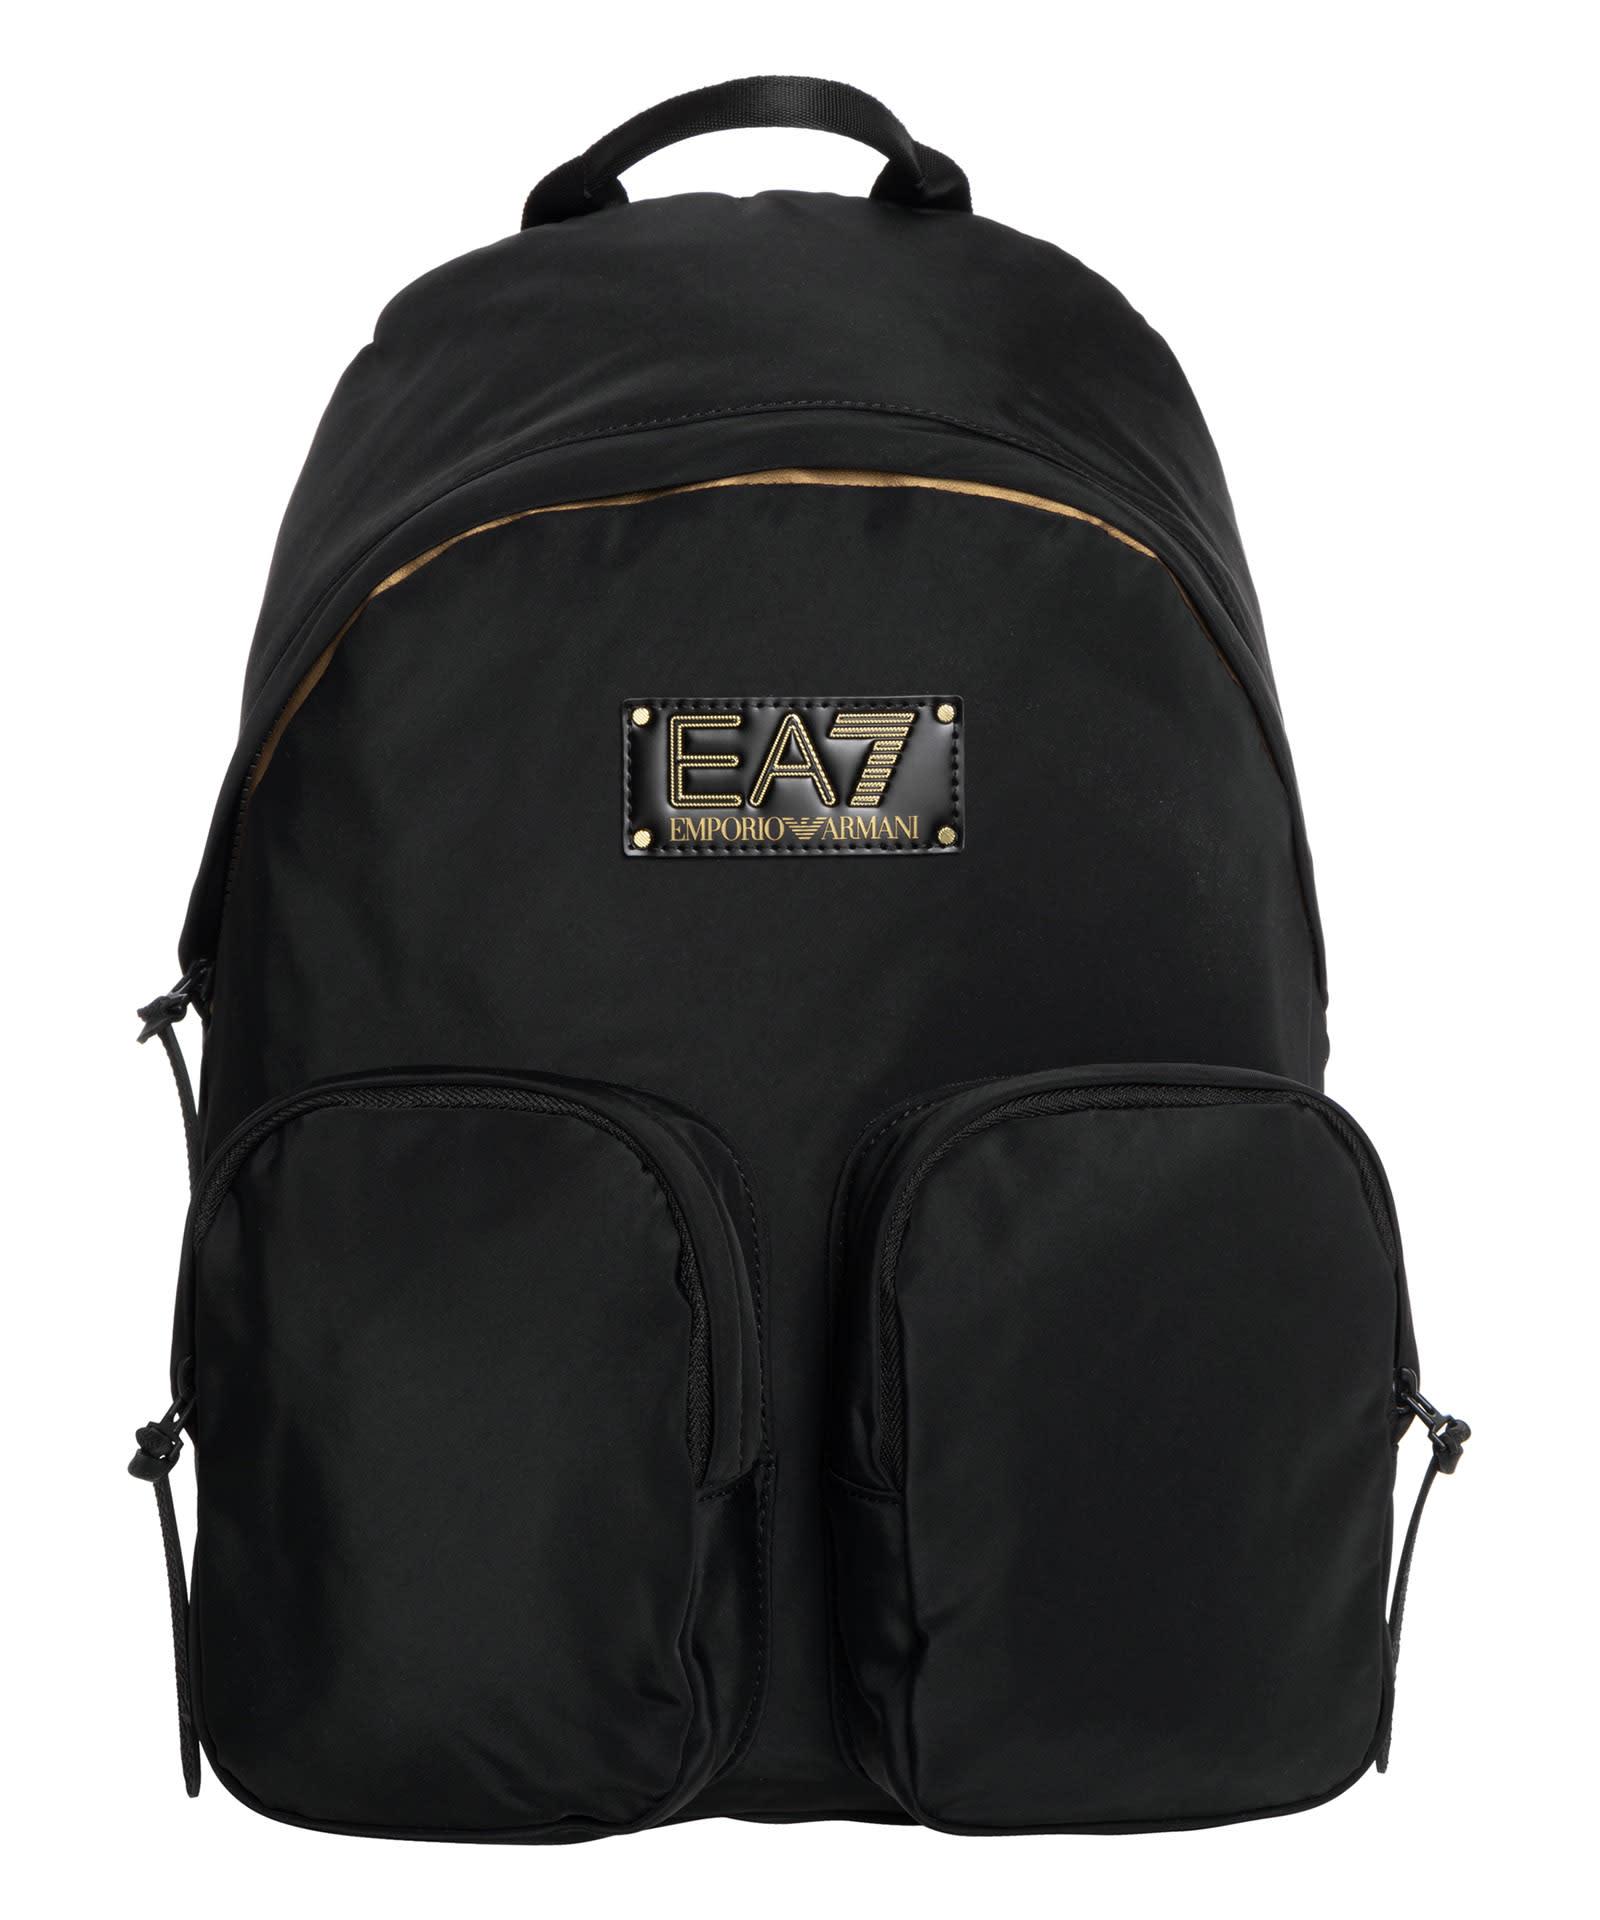 Emporio Armani Backpack in Black | Lyst